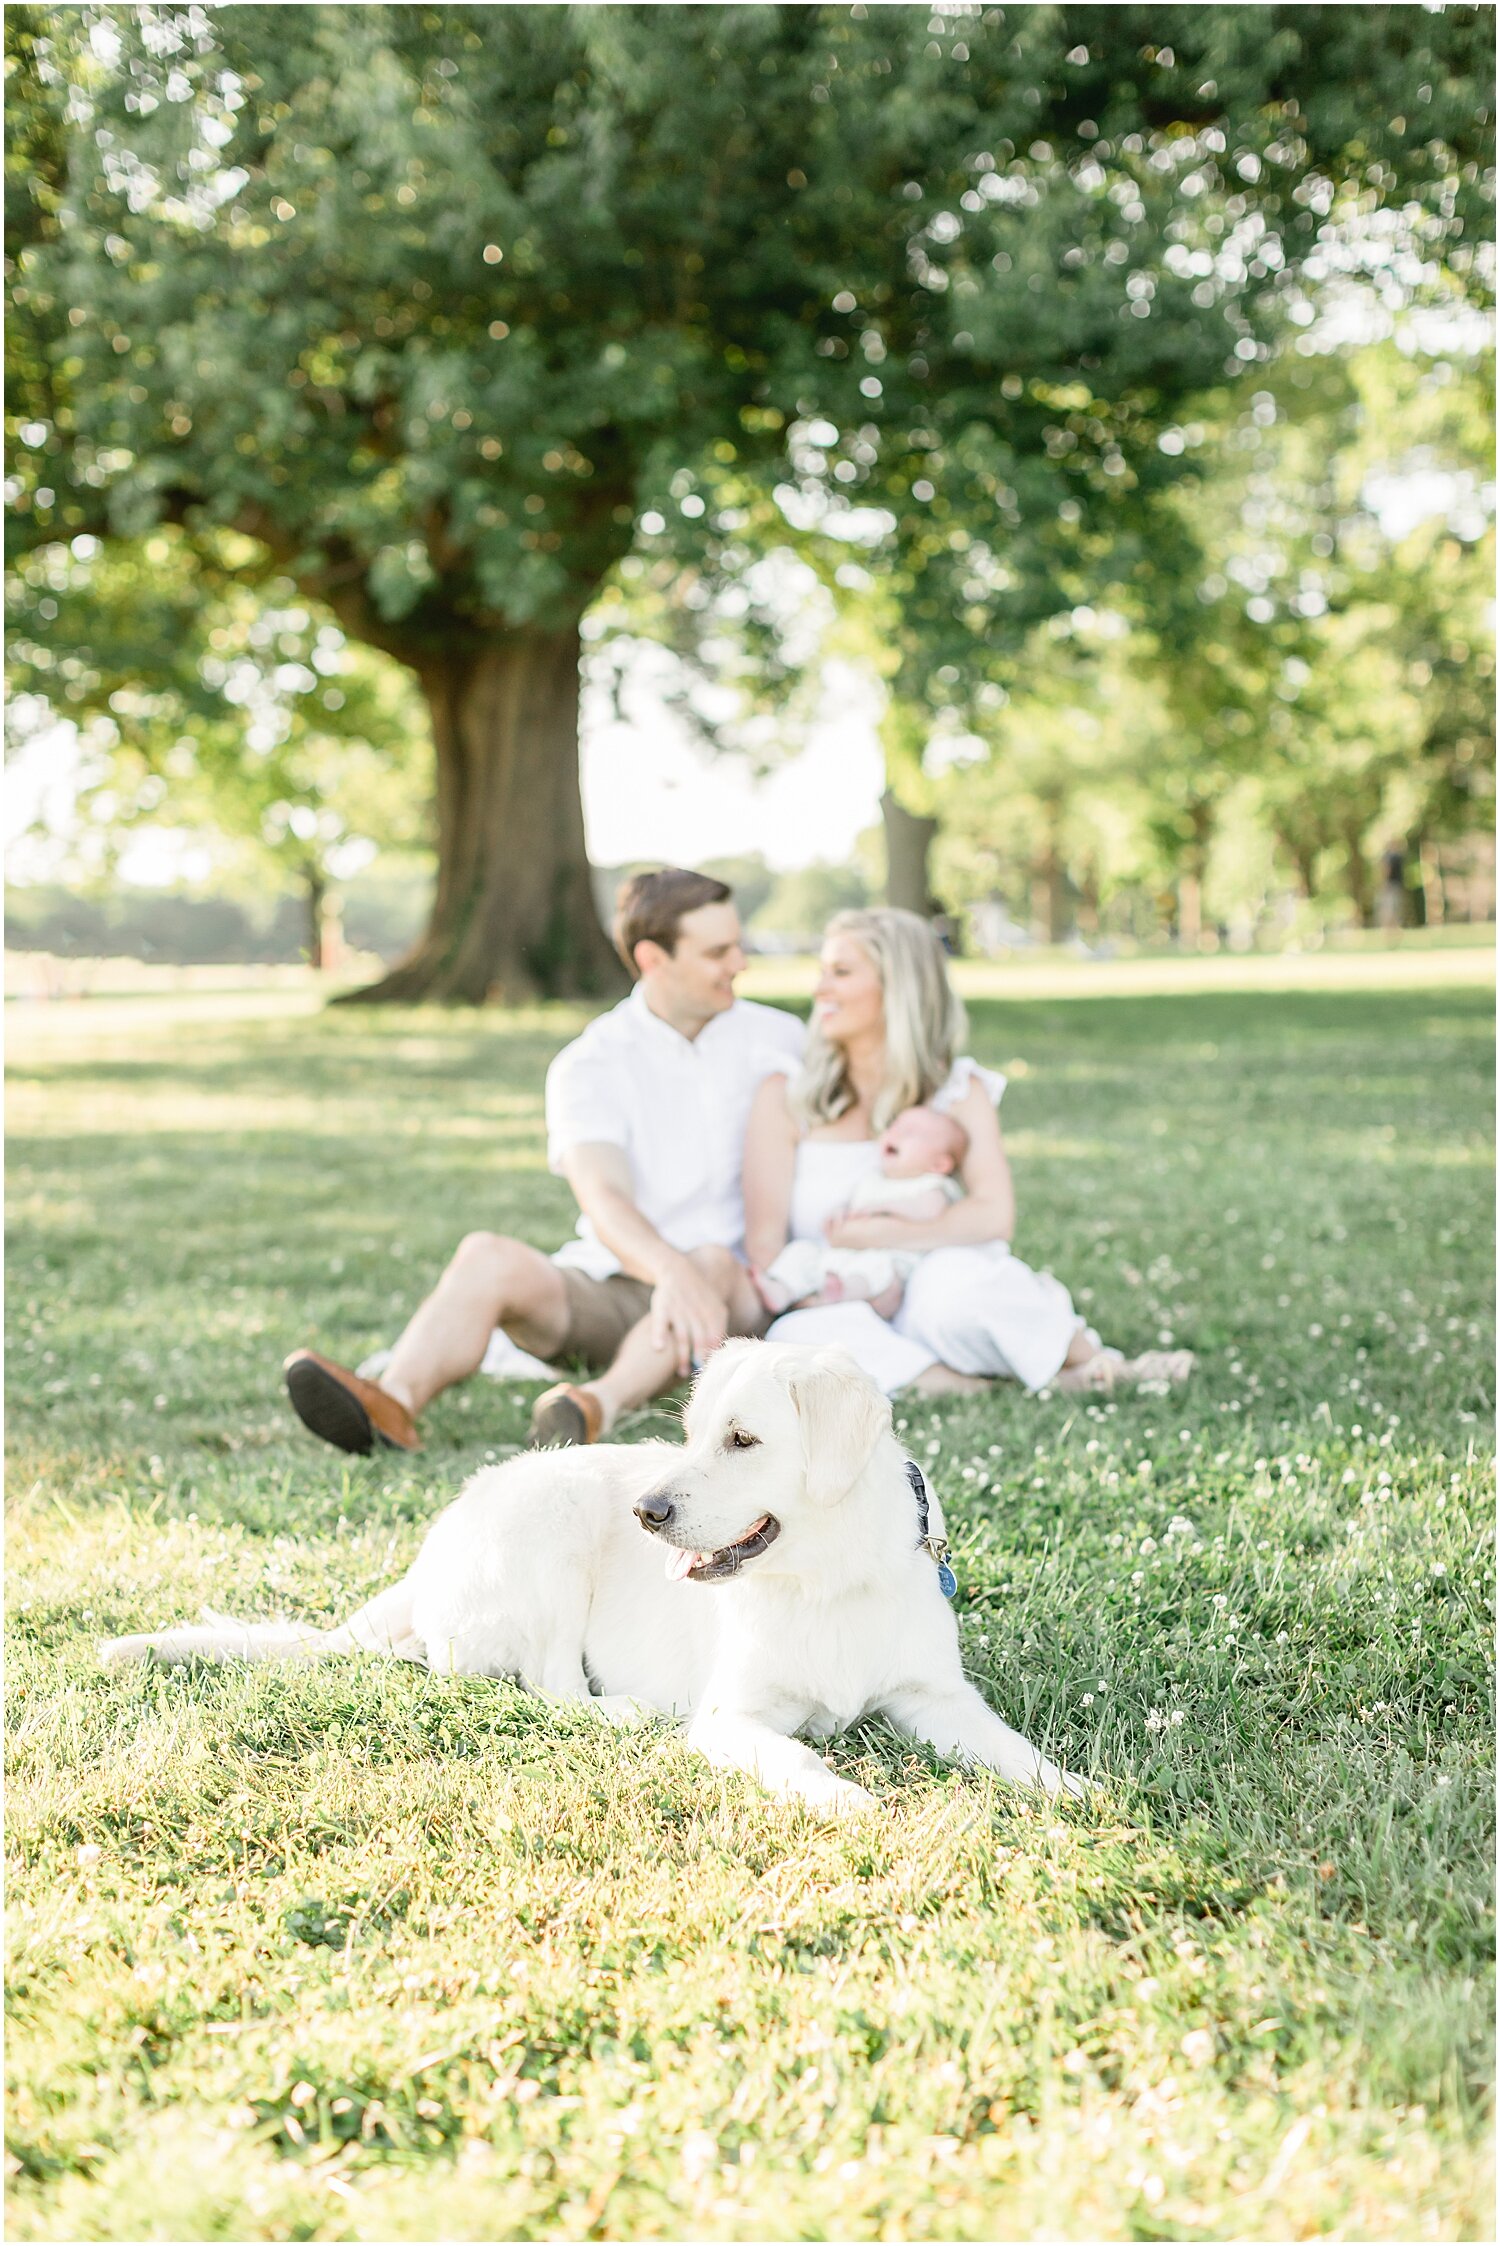 Newborn photos with dog at Waveny Park in New Canaan, CT. Photos by Kristin Wood Photography.